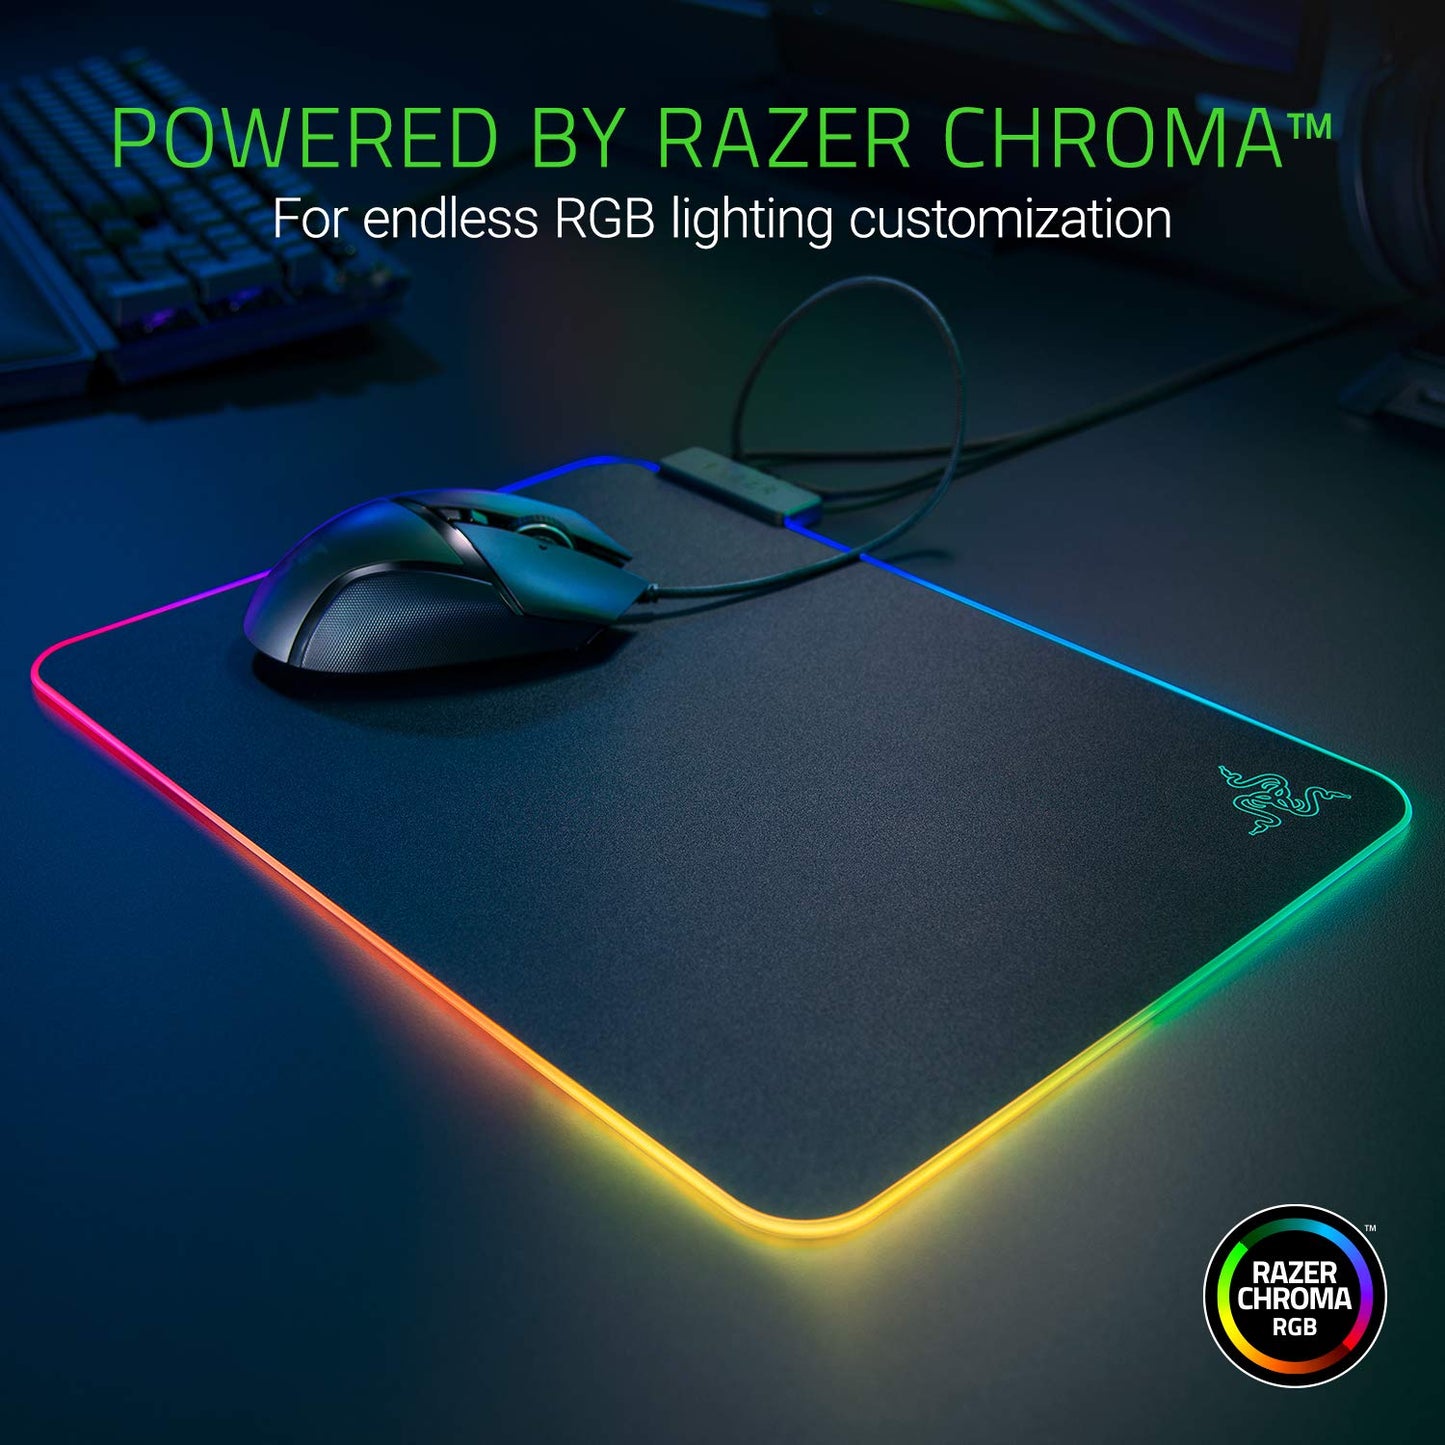 Razer Firefly Hard V2 RGB Gaming Mouse Pad & Mamba Elite Wired Gaming Mouse: 16,000 DPI Optical Sensor - Chroma RGB Lighting - 9 Programmable Buttons - Mechanical Switches